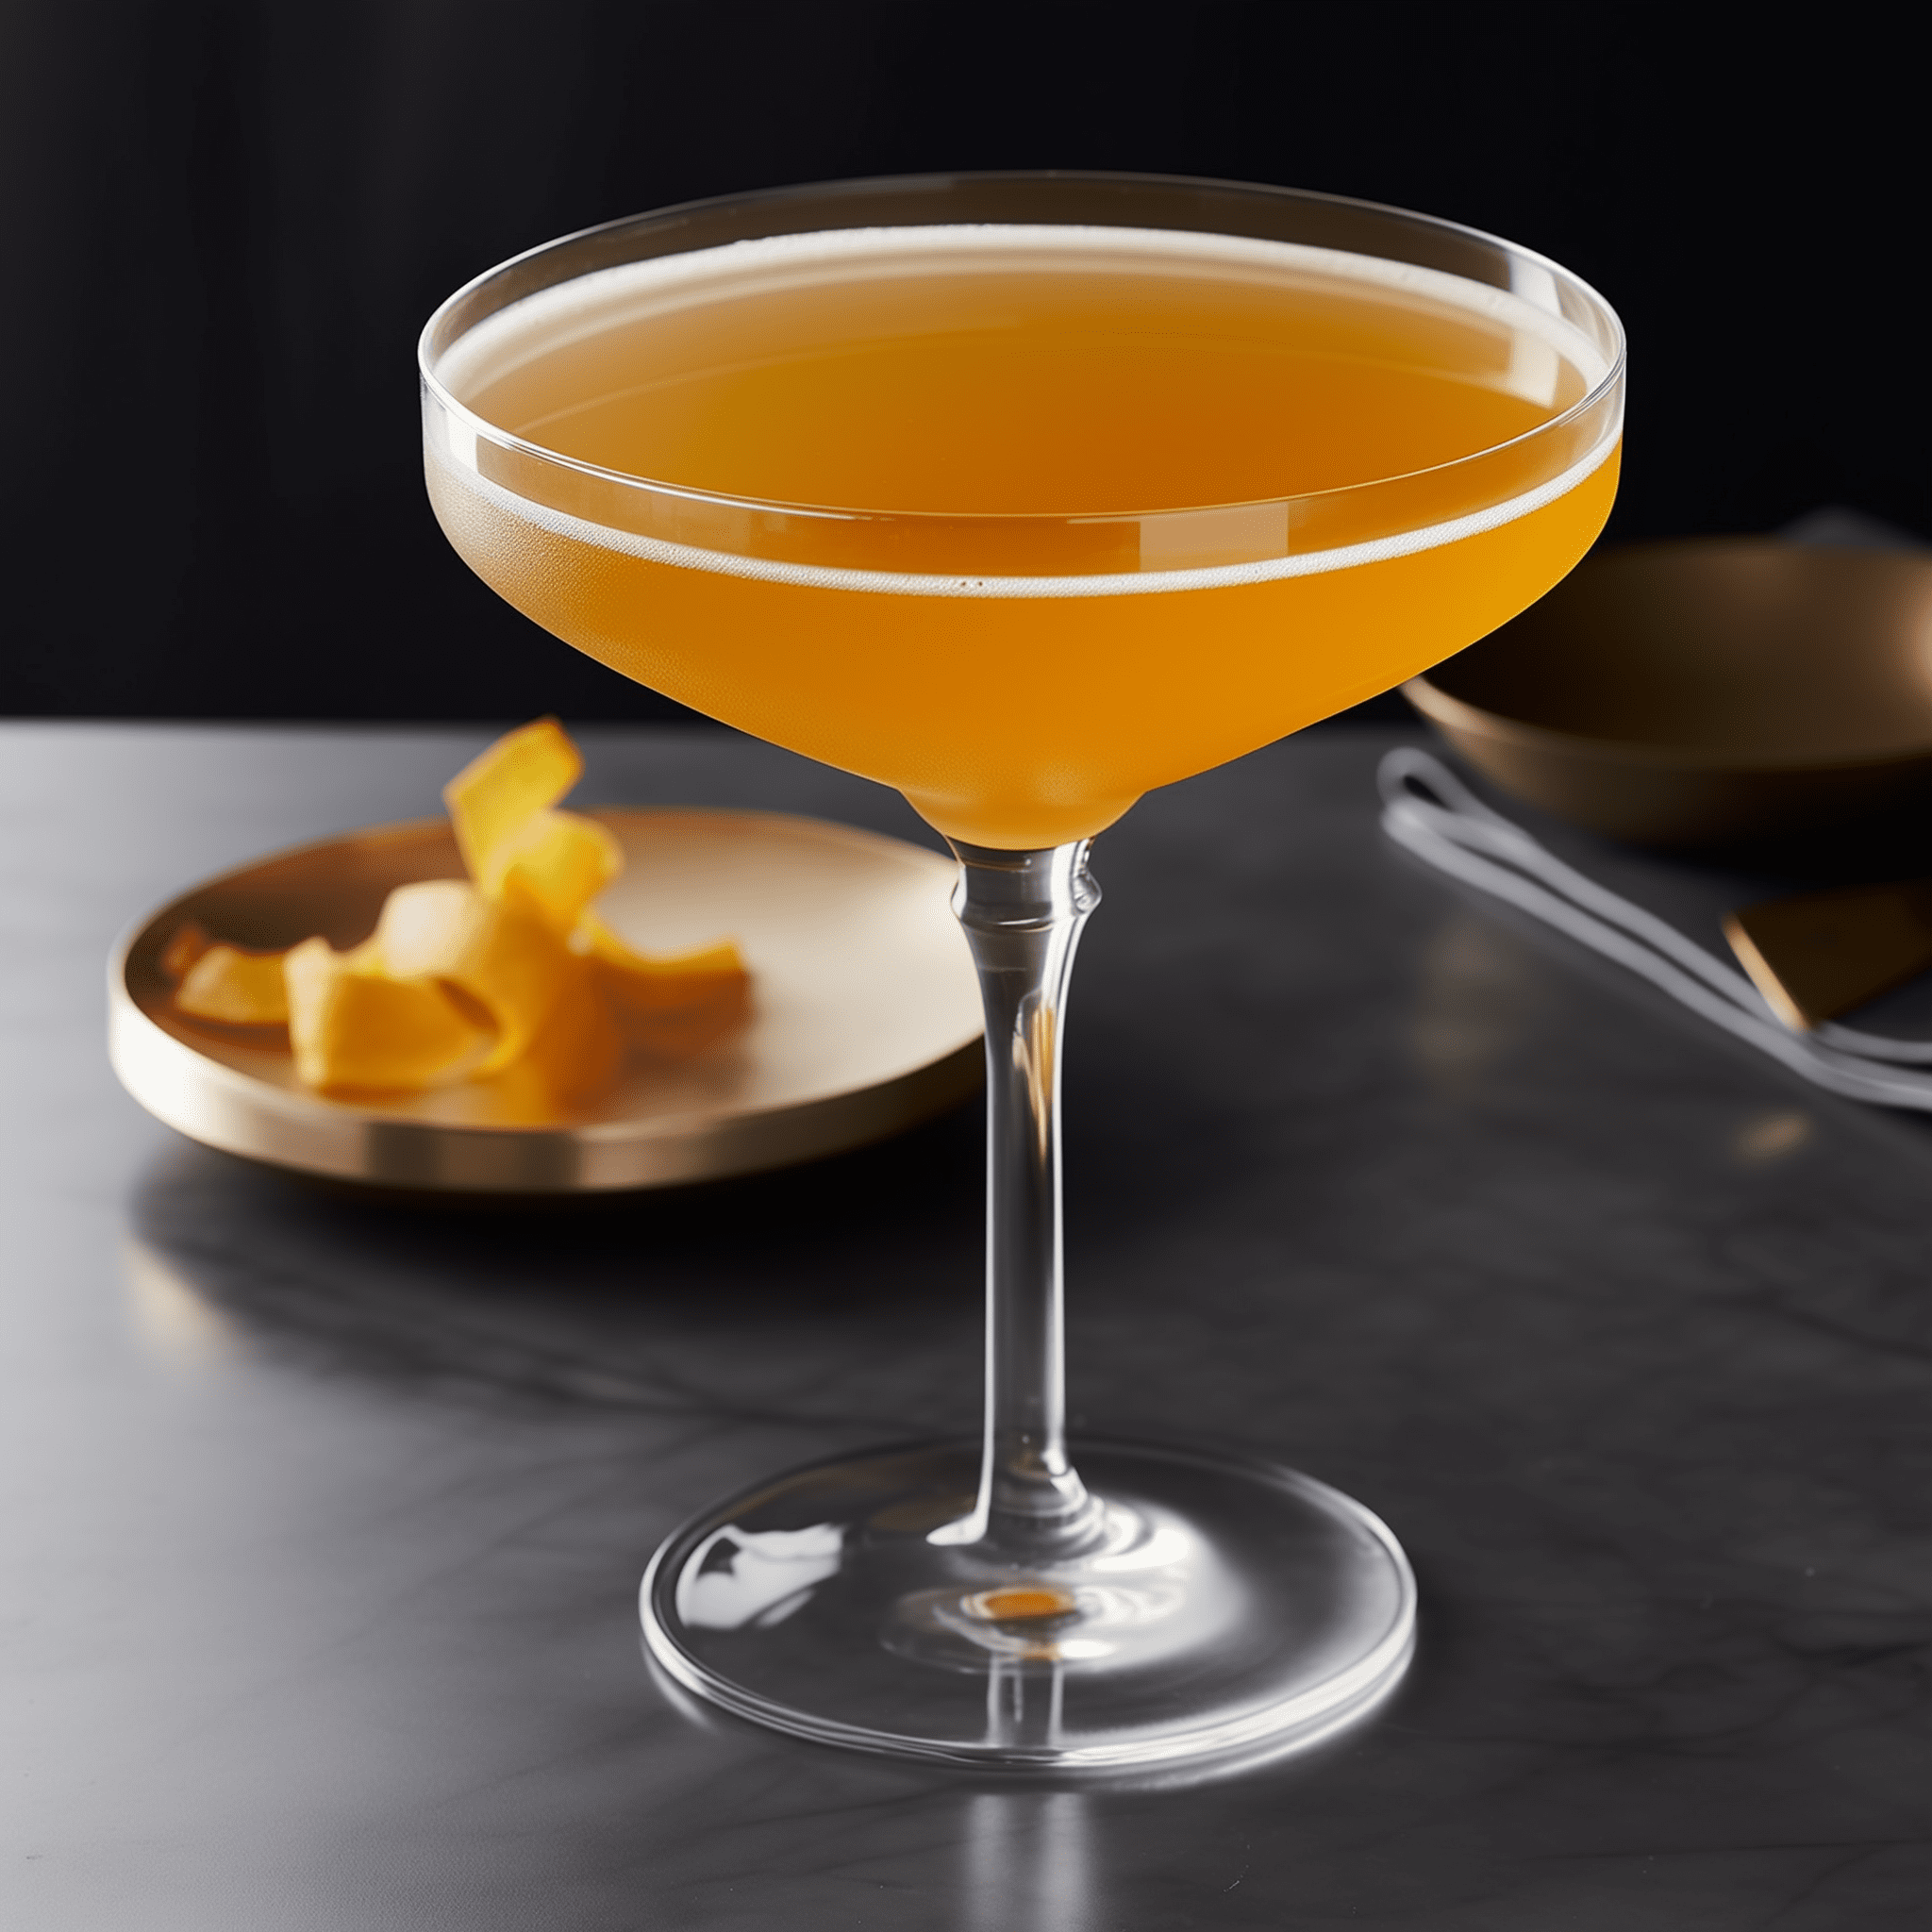 Buzz Bomb Cocktail Recipe - The Buzz Bomb is a complex, multi-layered cocktail. It's strong, with a noticeable kick from the vodka and cognac, while the lime juice adds a tartness that balances the sweetness of the orange liqueur and the herbal notes of the benedictine. The champagne adds effervescence, lightening the drink and giving it a celebratory feel.